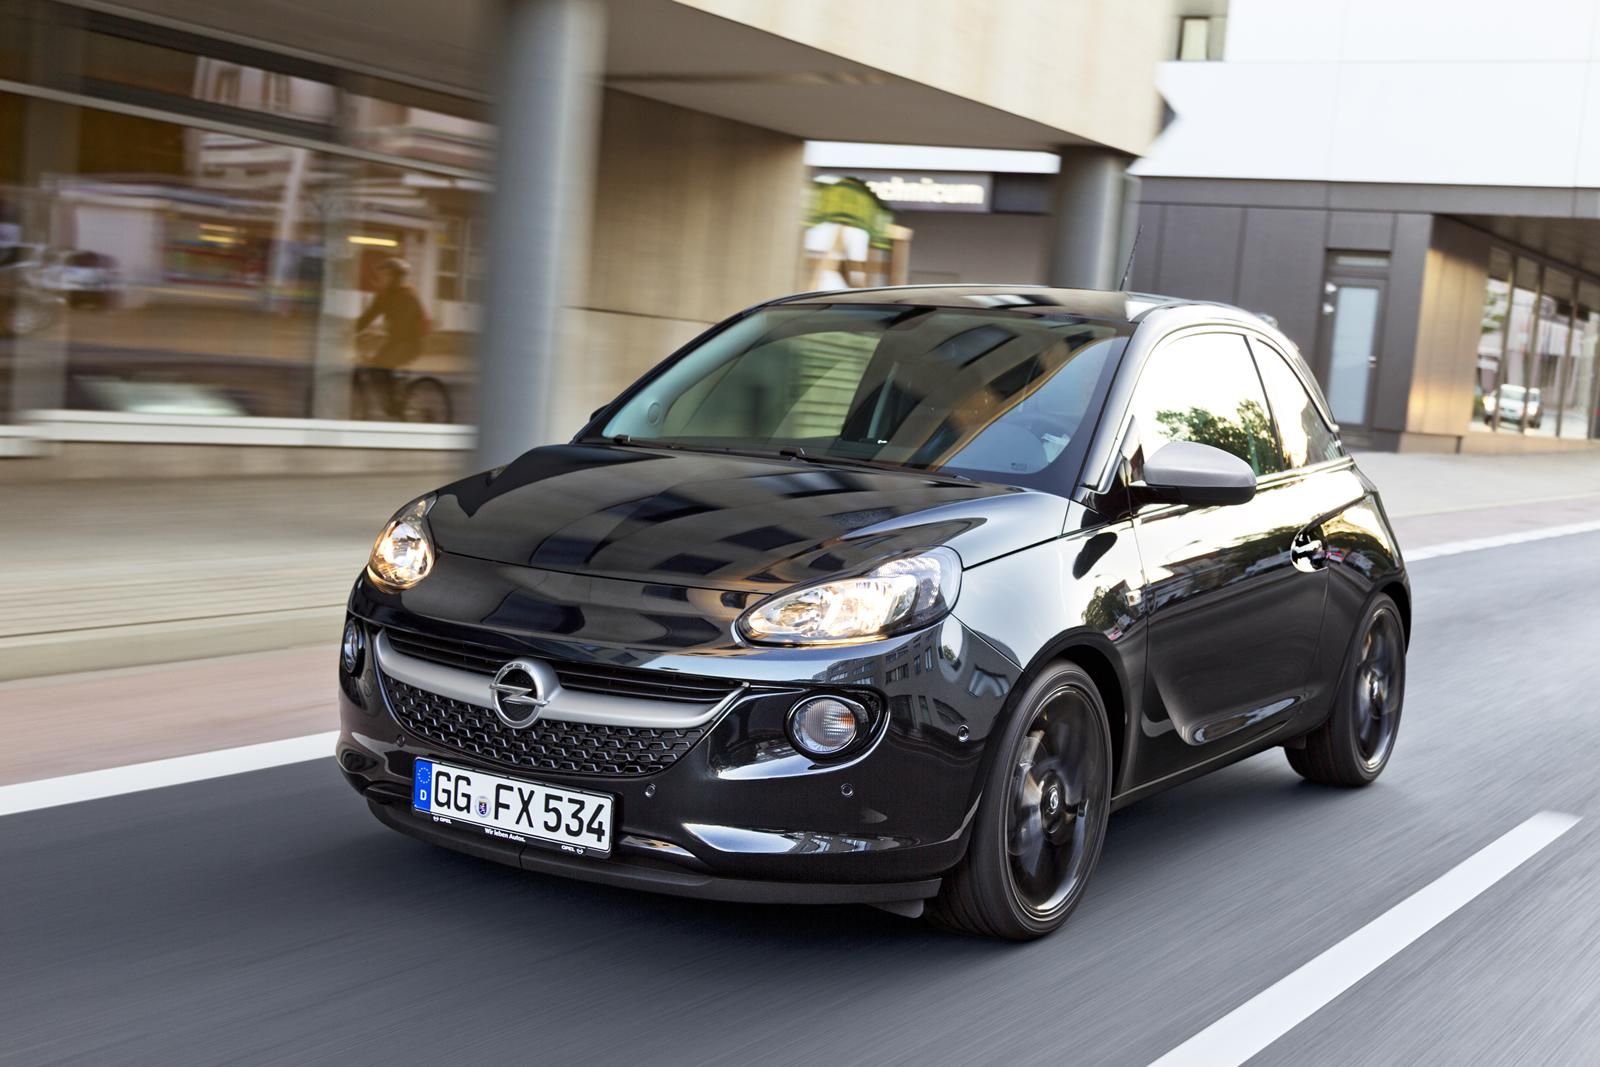 OPEL ADAM BLACK VE WHTE LNK LMTED EDTON RESM GALERS